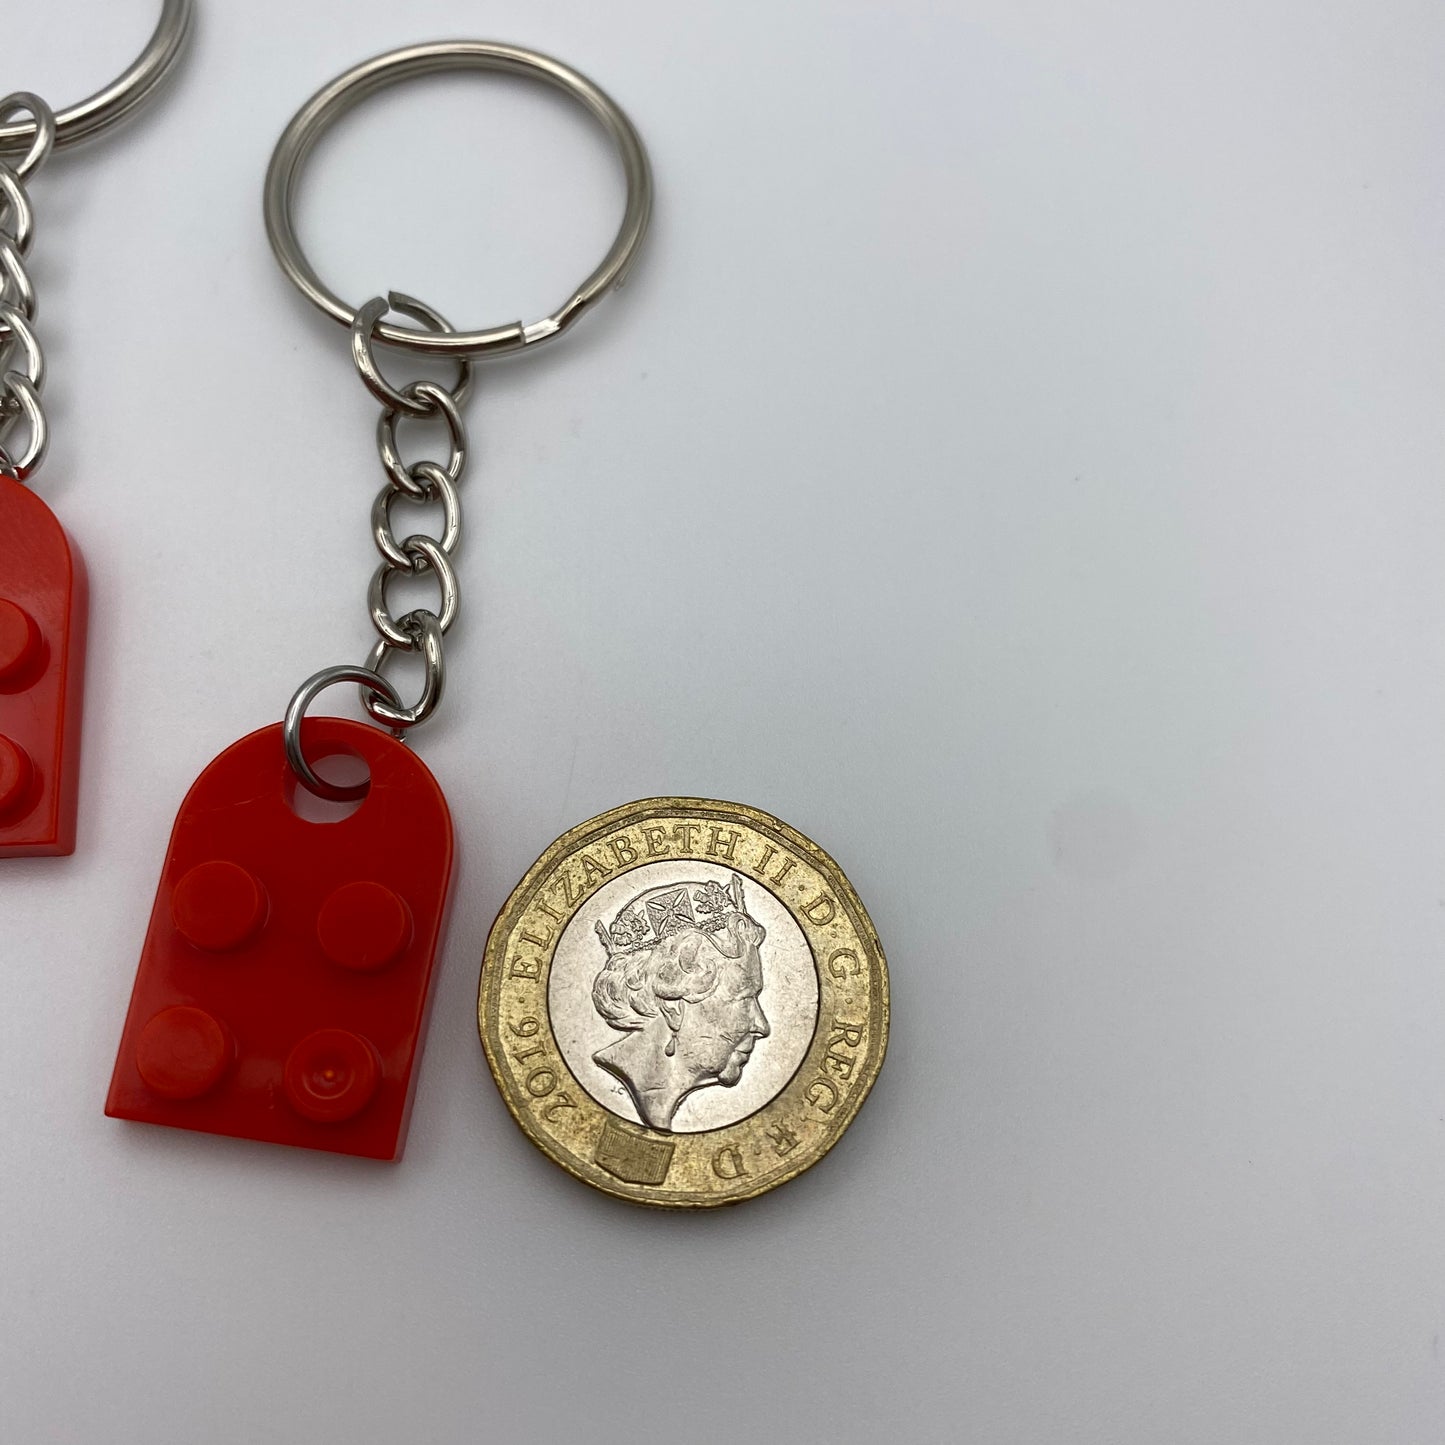 Red Matching Lego Heart Keyring